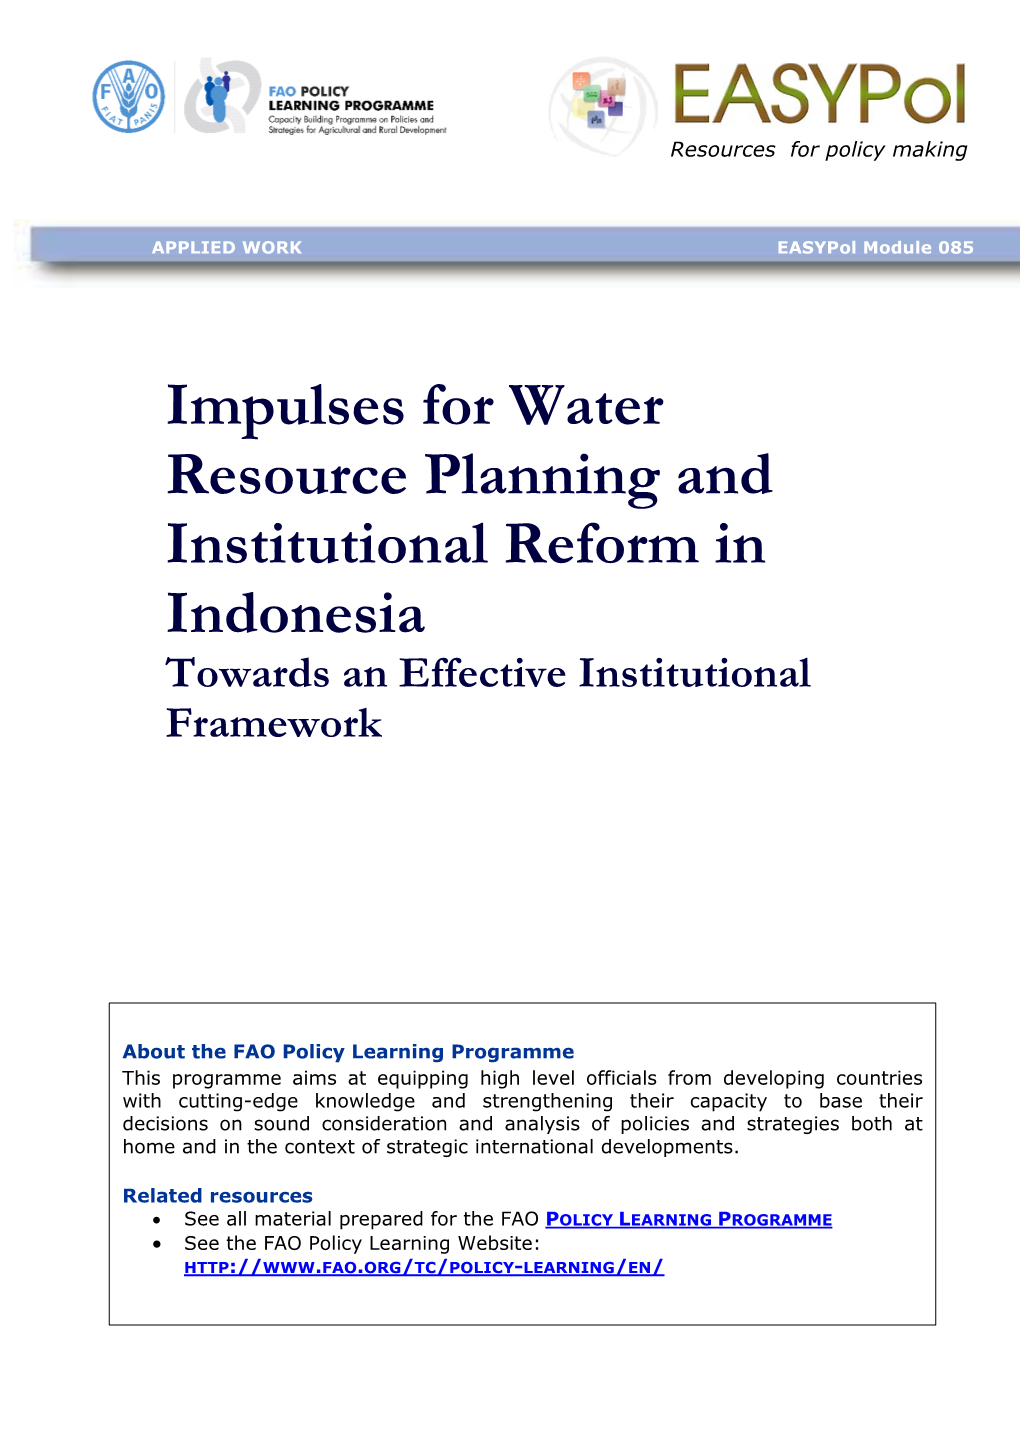 Impulses for Water Resource Planning and Institutional Reform in Indonesia Towards an Effective Institutional Framework